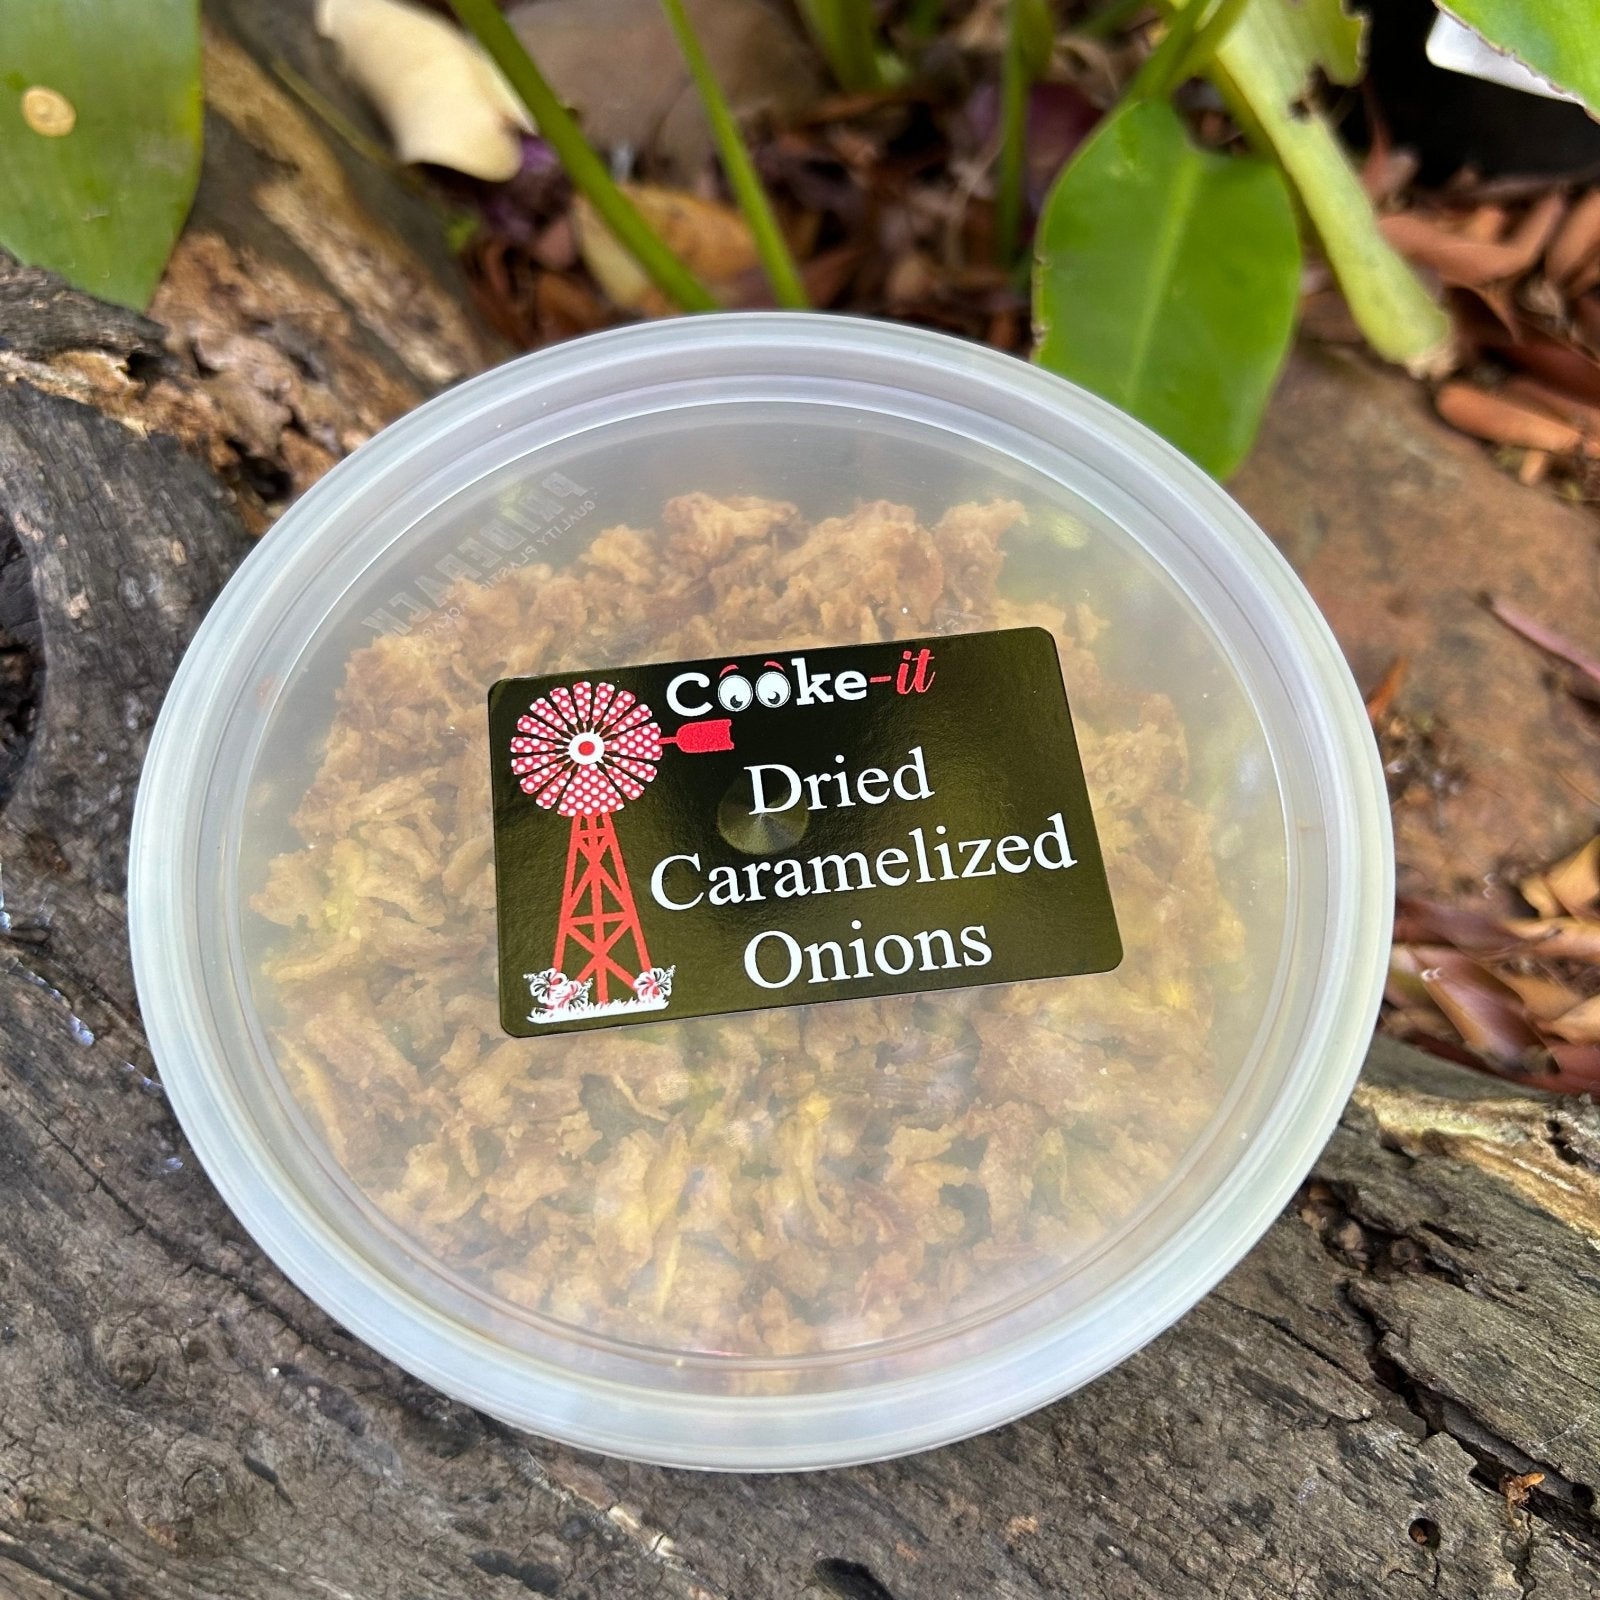 Dried Caramelized Onions (100g) - The Deli